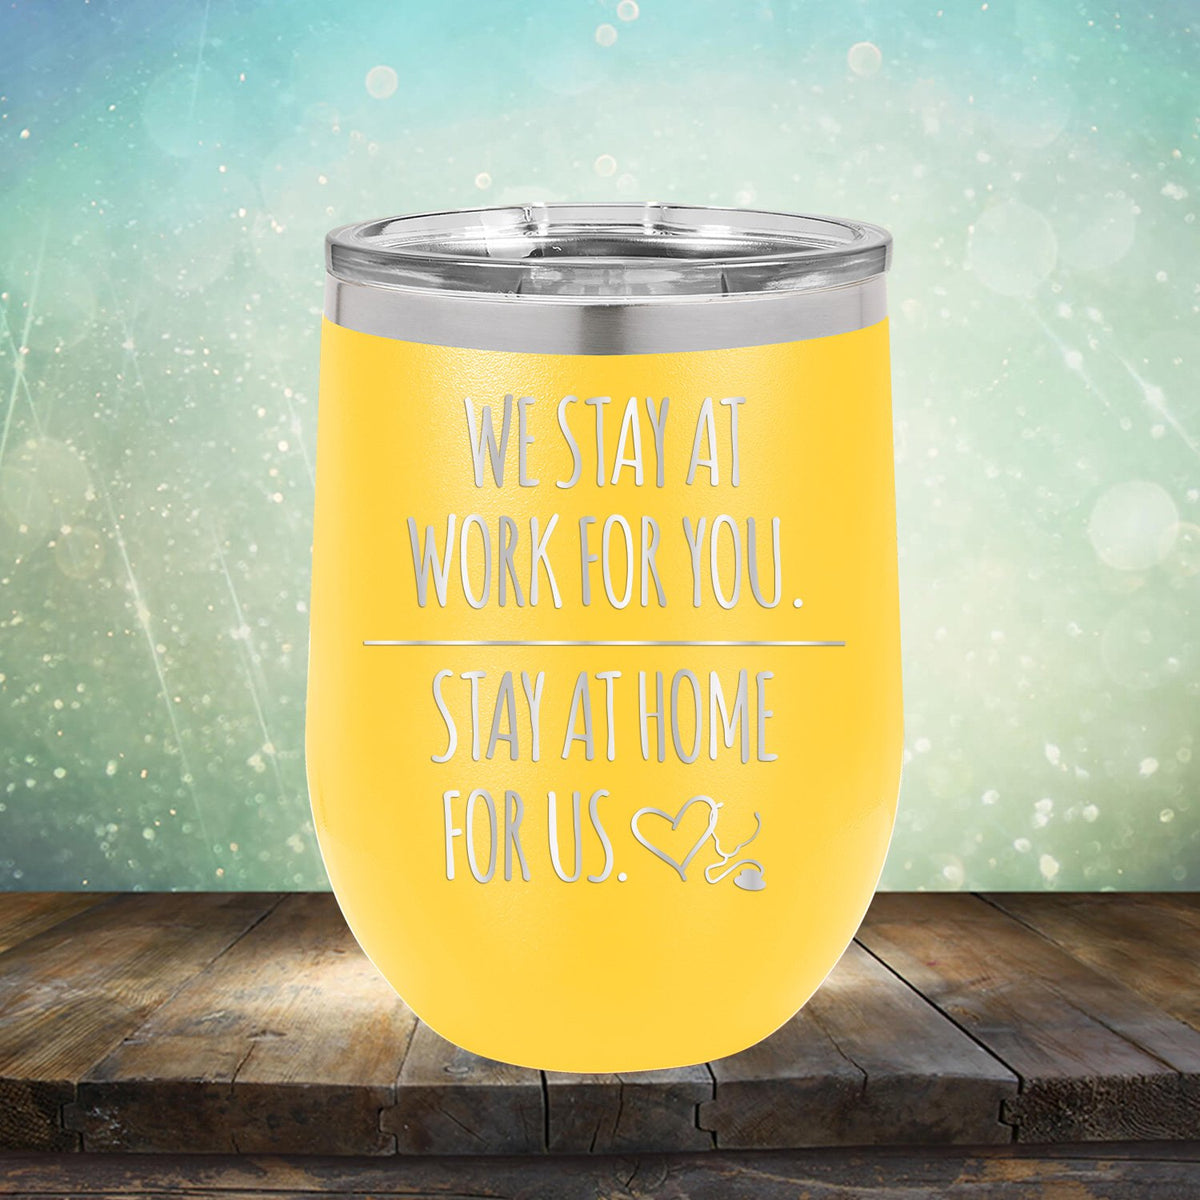 We Stay at Work for You Stay at Home for Us - Stemless Wine Cup